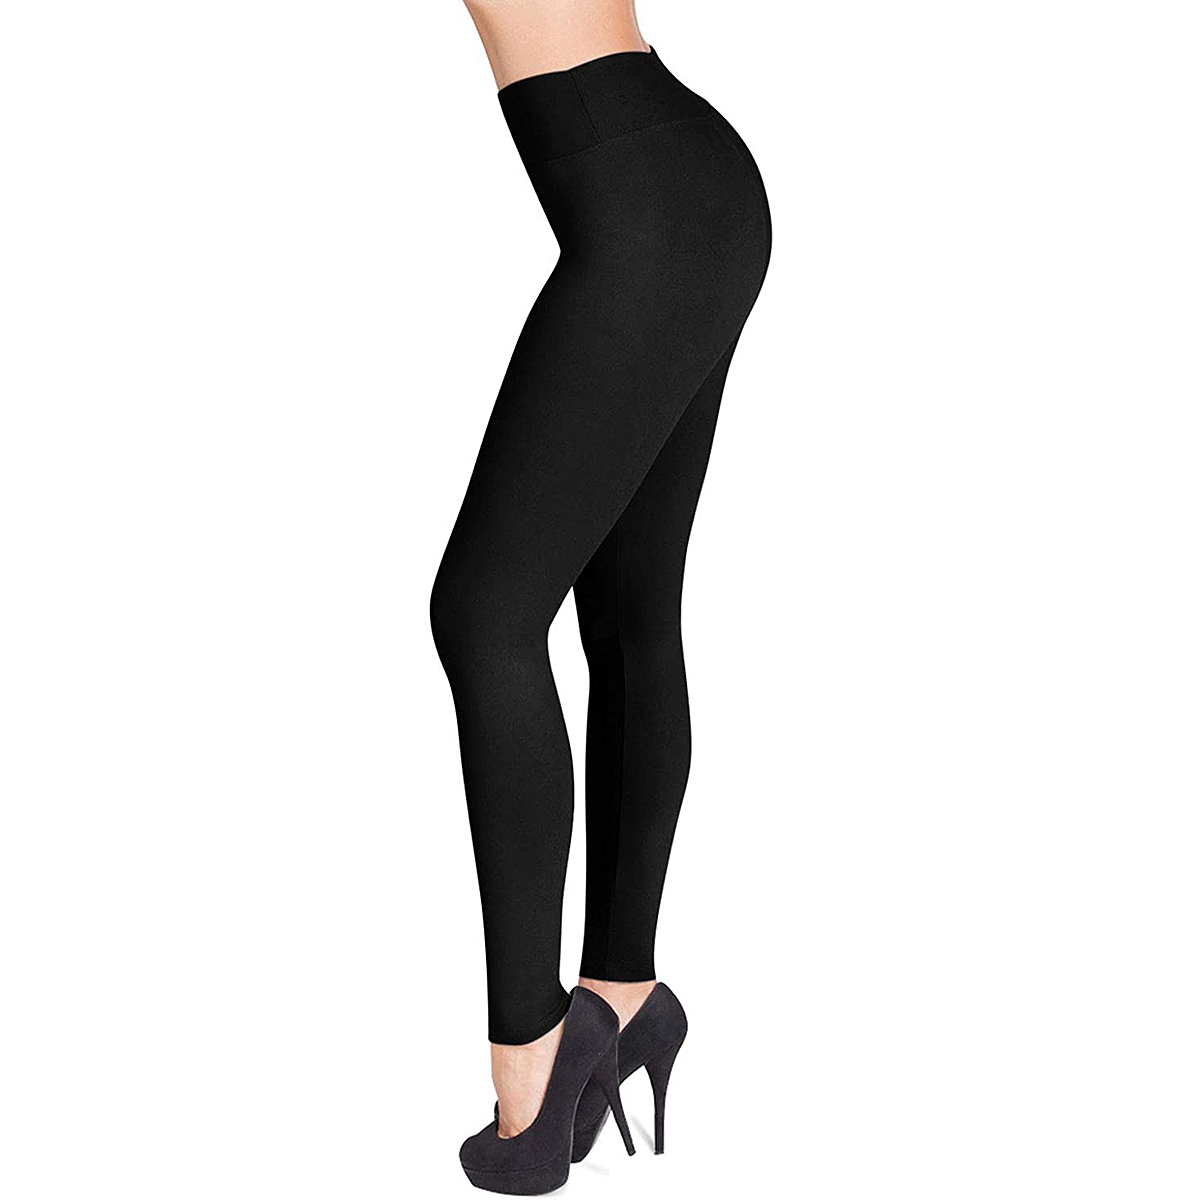 The Best Types of Leggings for Every Figure - PureWow